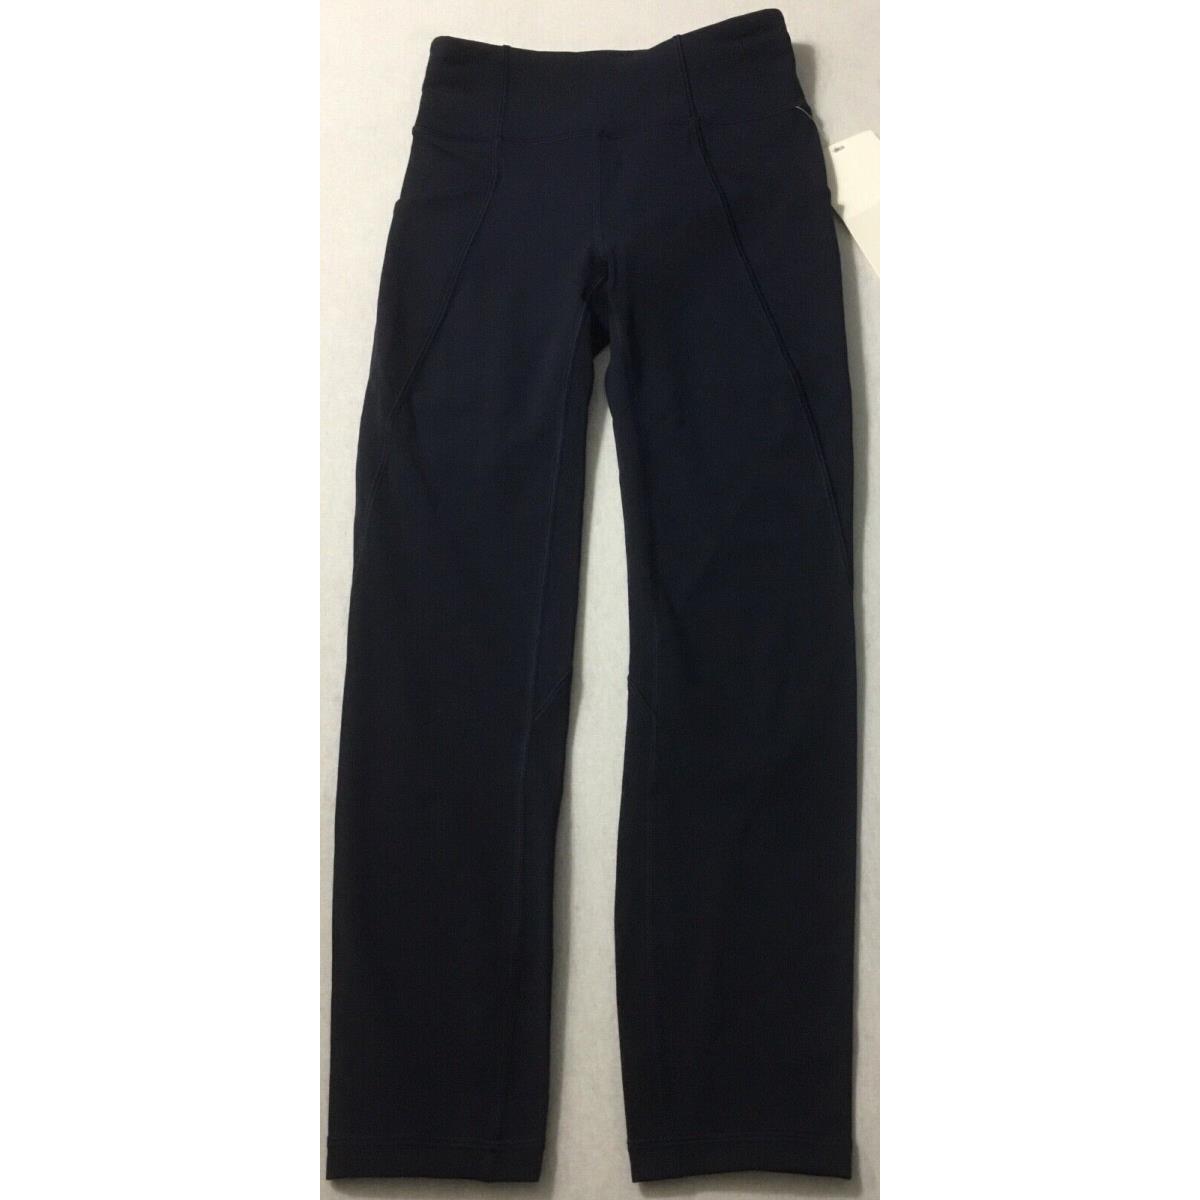 Lululemon Time To Sweat Crop 23 Luxtreme LW6BA0S Trnv Navy Blue Size 4